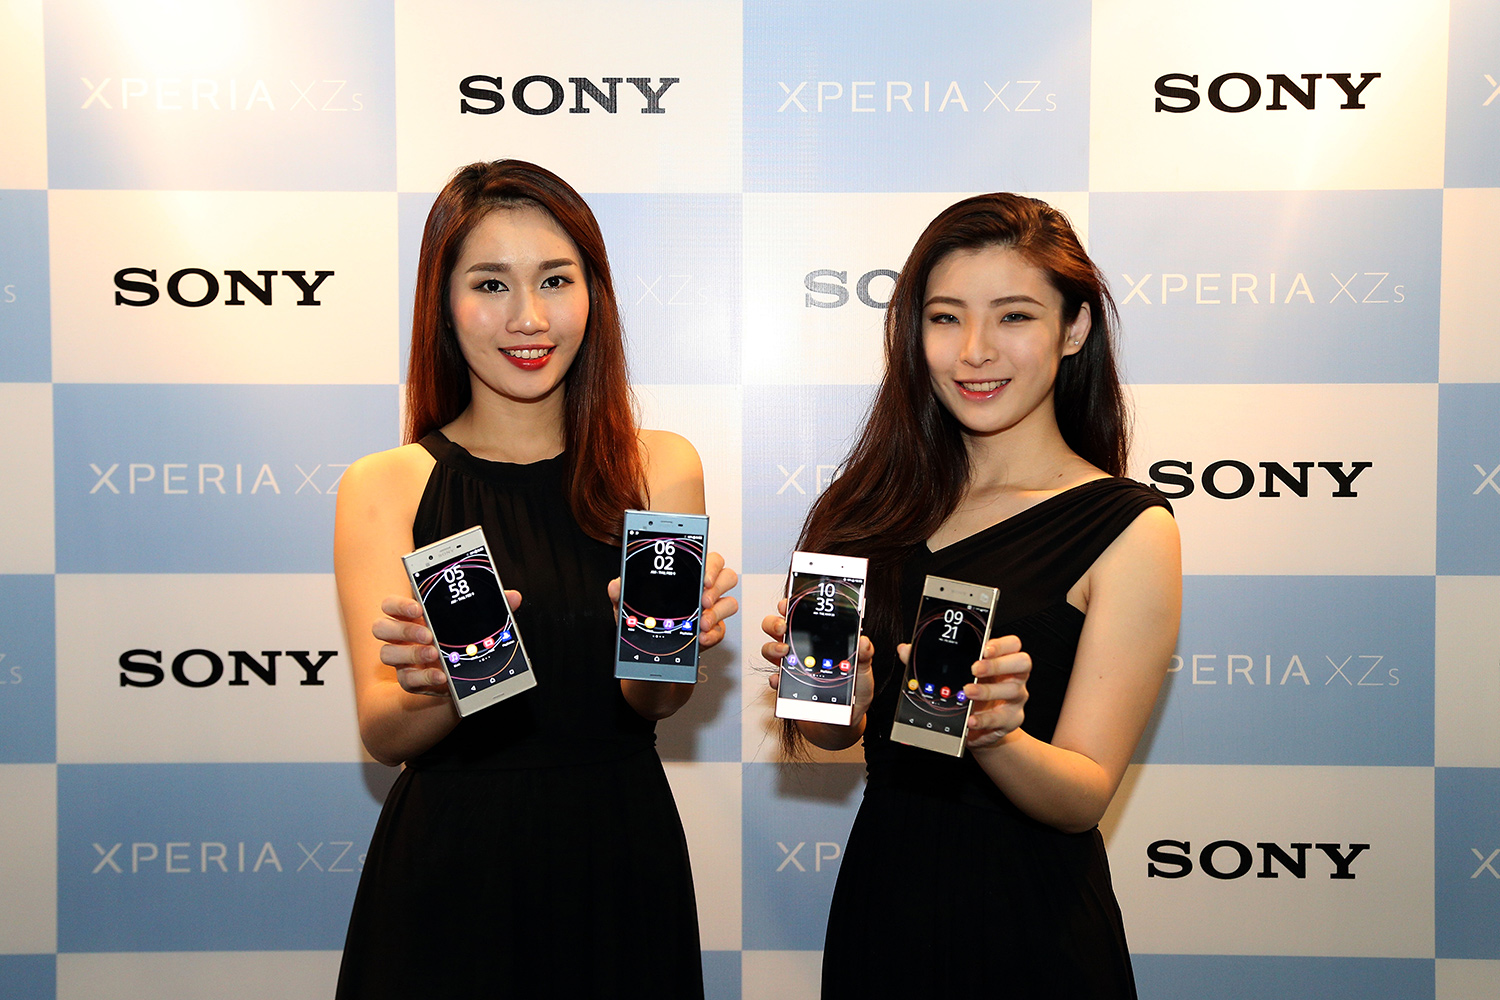 Sony Xperia XZs and Xperia XA1 Officially Launched in Malaysia